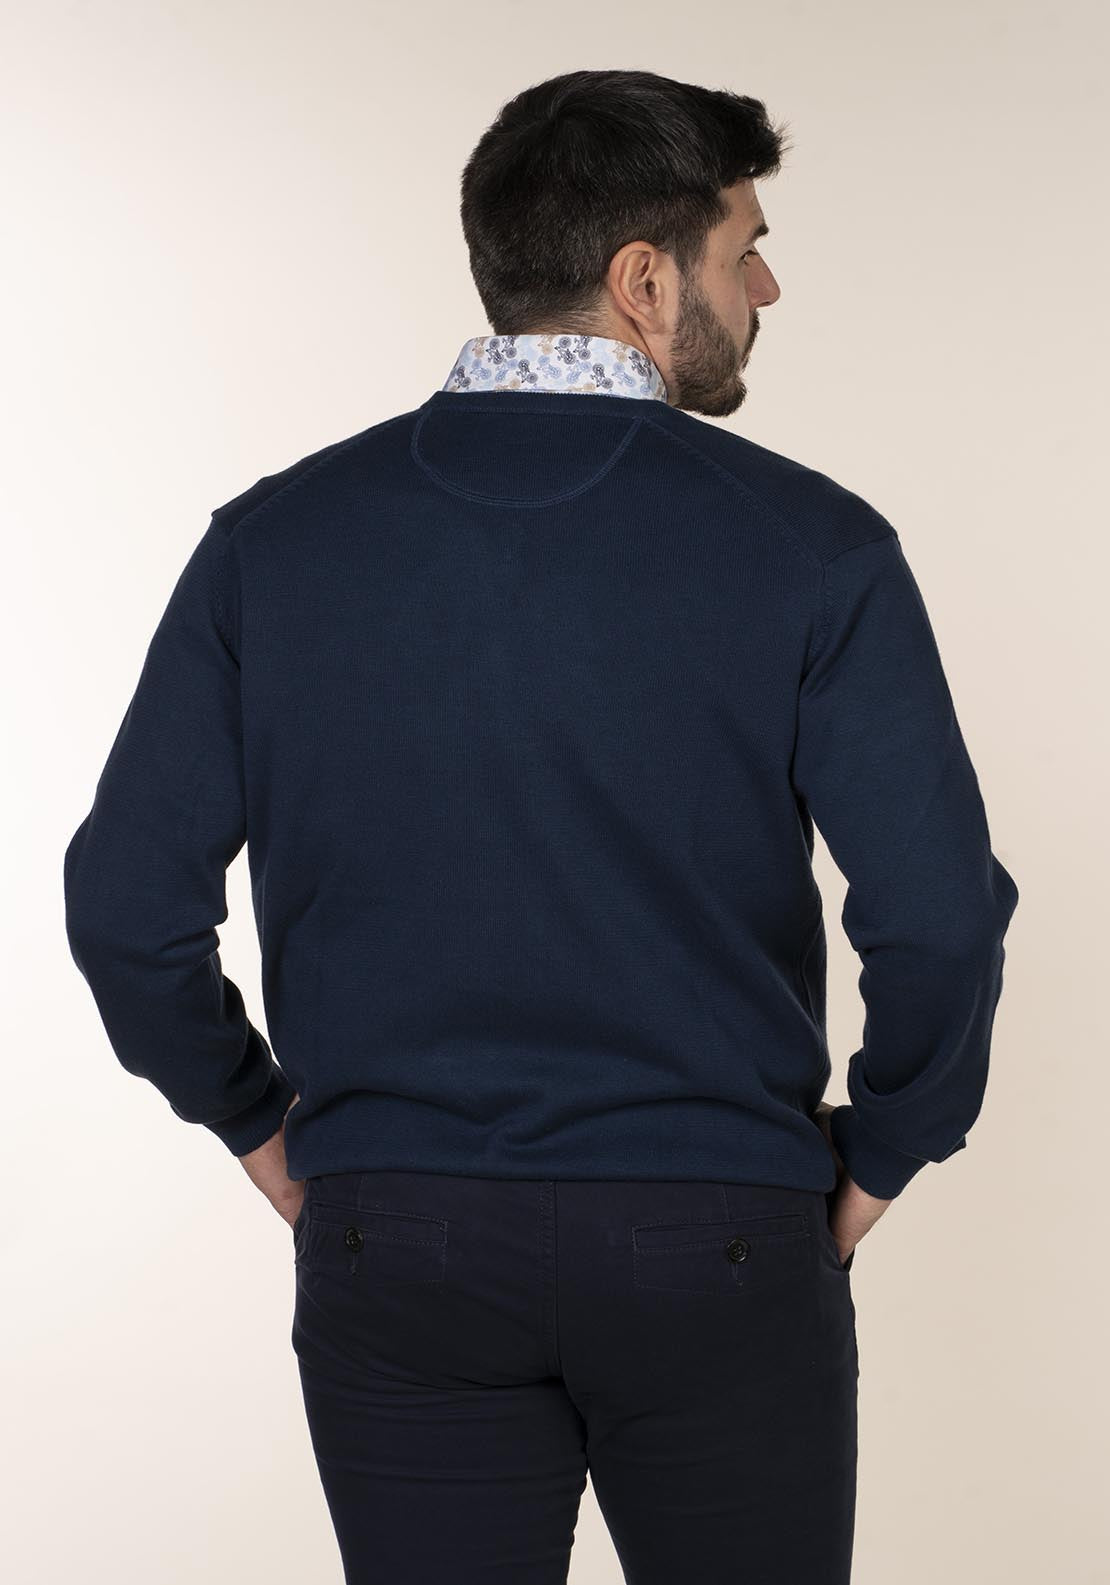 Yeats Plain Cotton V Neck Sweaters - Blue 3 Shaws Department Stores